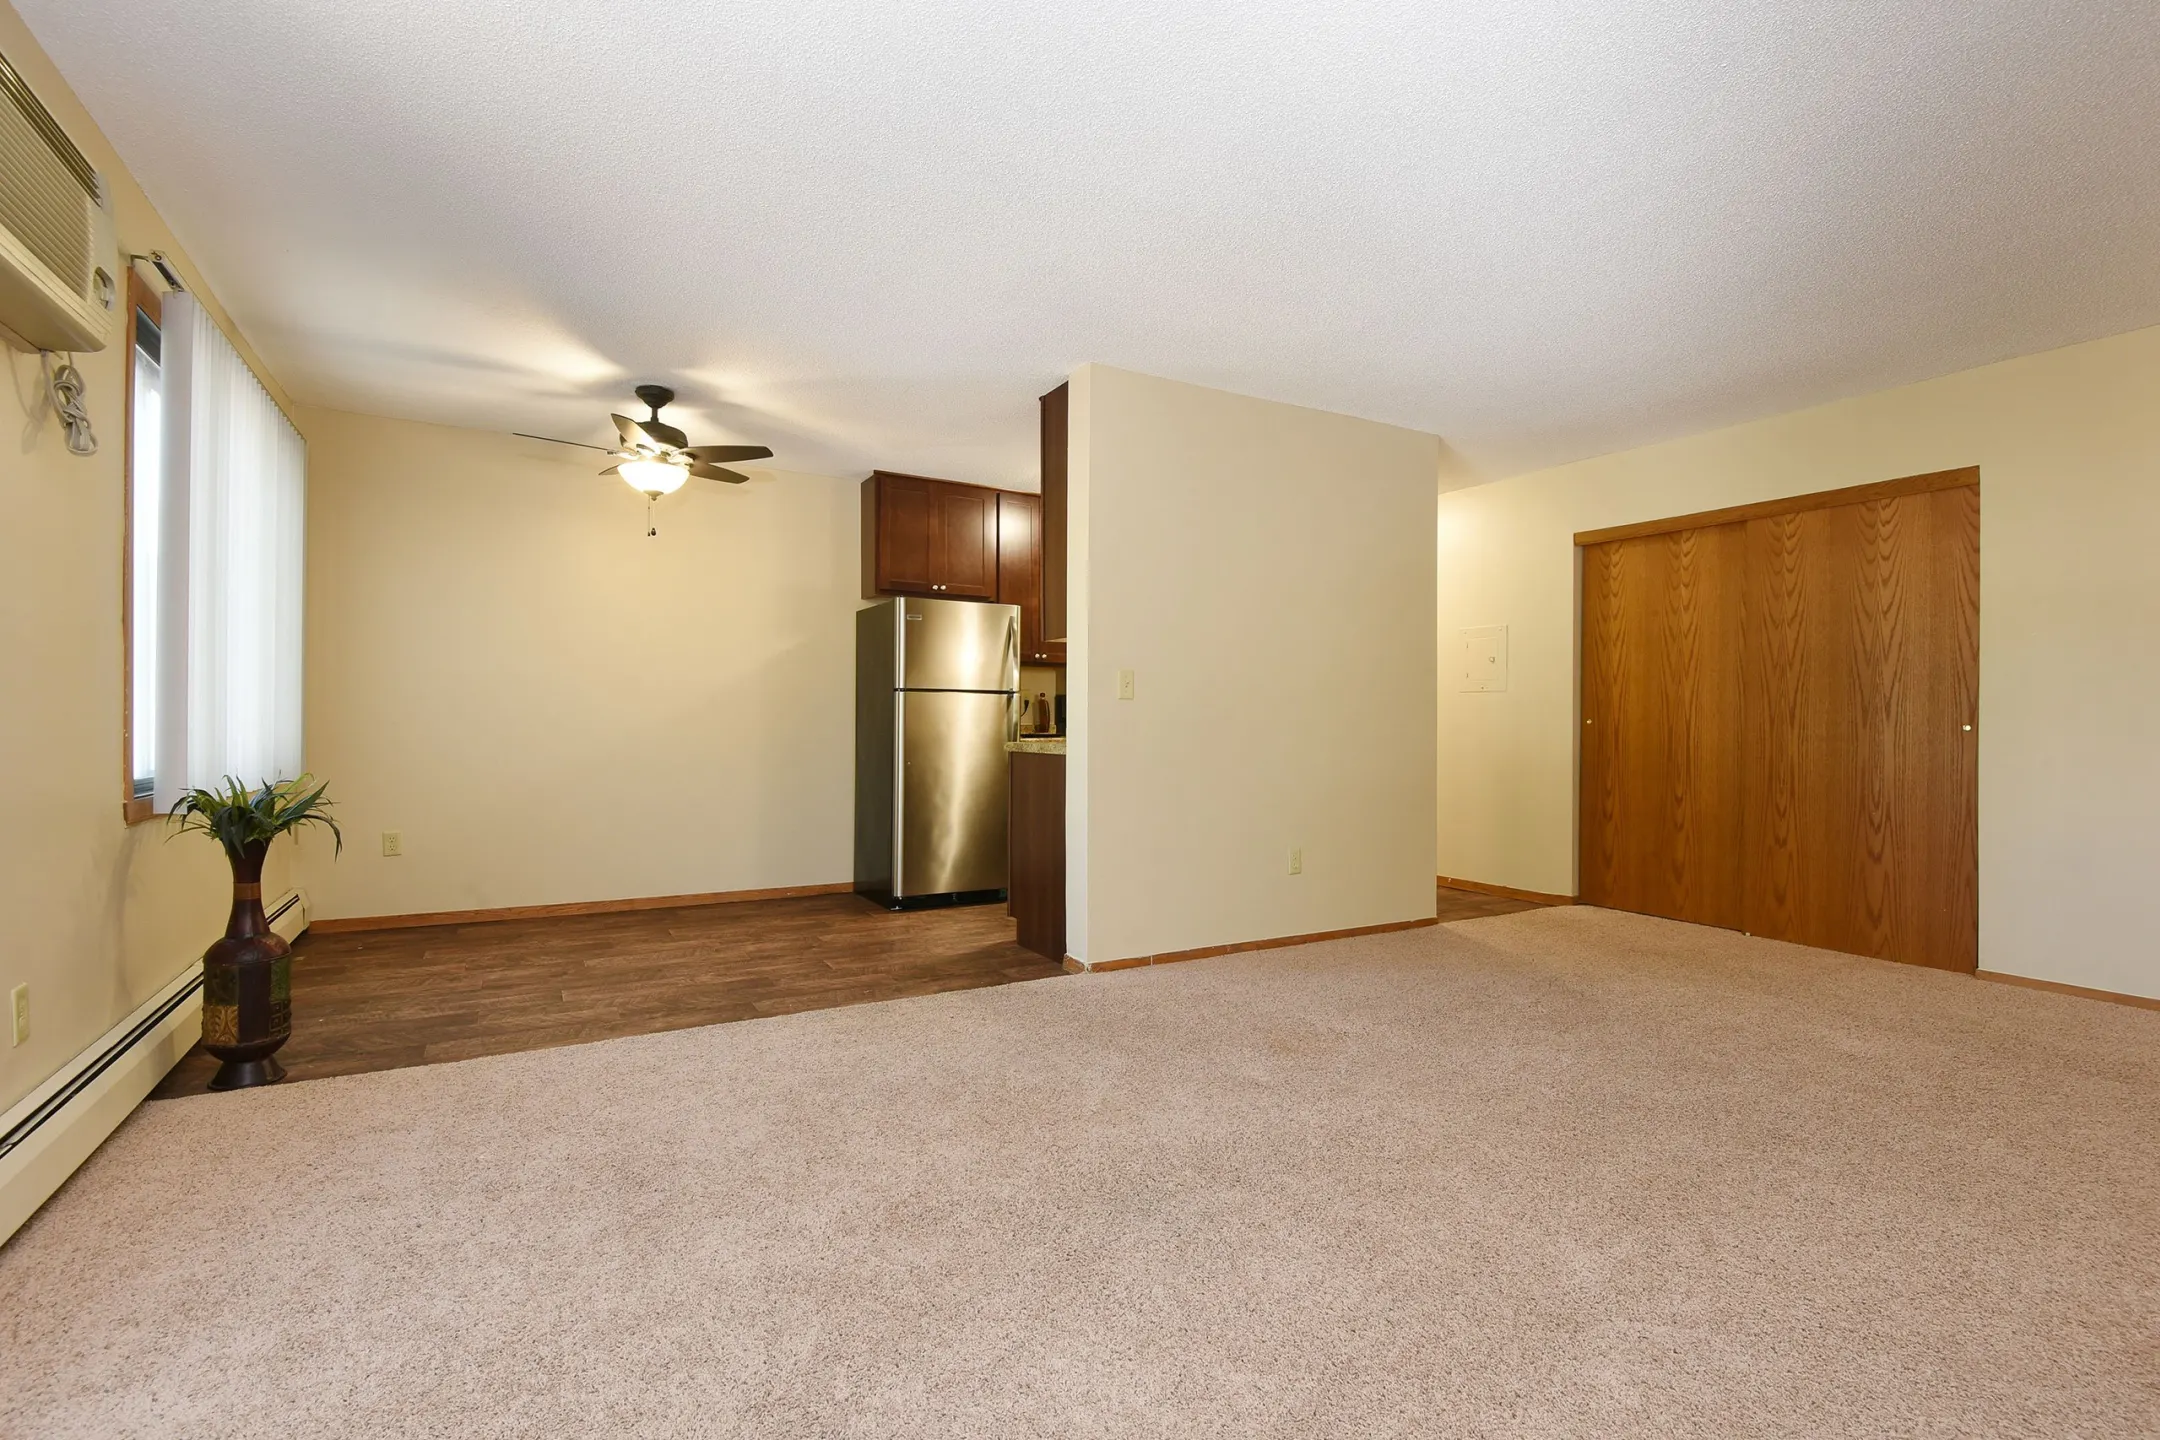 Living Room - The Edge Of Uptown Apartments - Saint Louis Park, MN